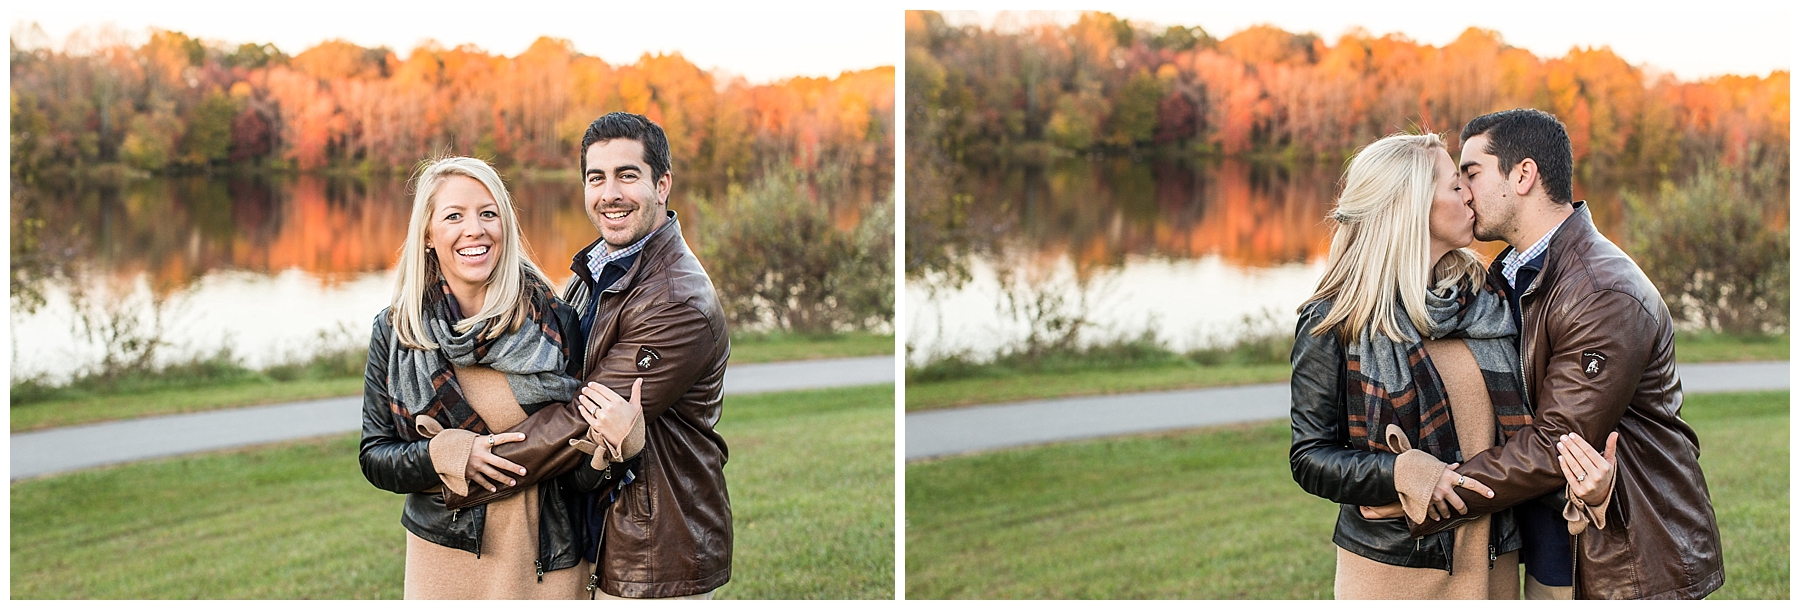 Nicole Mike Centennial Park Engagement Session Living Radiant Photography photos_0010.jpg